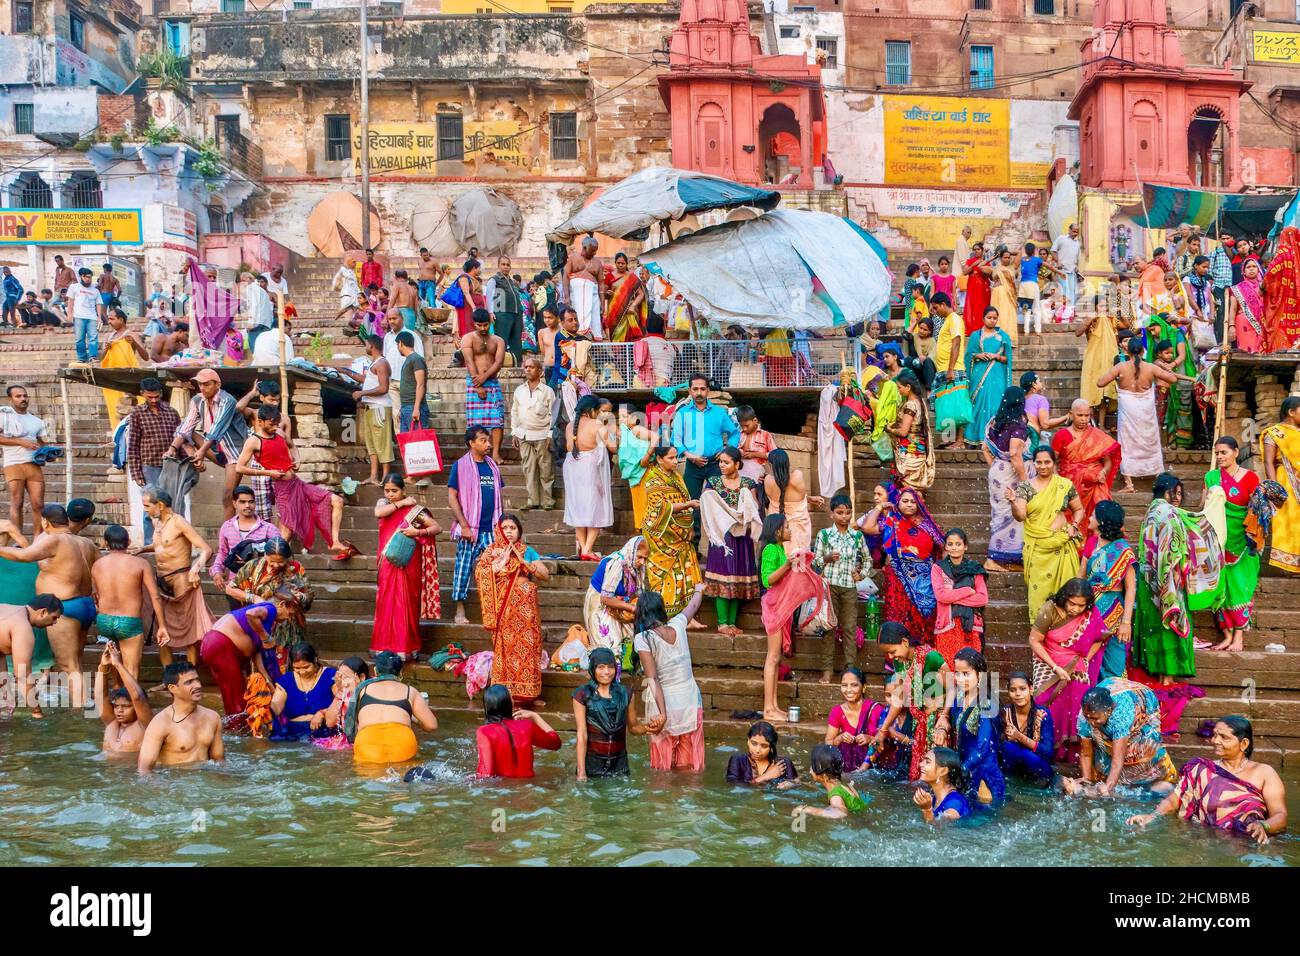 Varanasi, India - November 11, 2015. A large group of Indian religious pilgrims standing on a ghat and bathing in the Ganges River, a ritual in Hindui Stock Photo